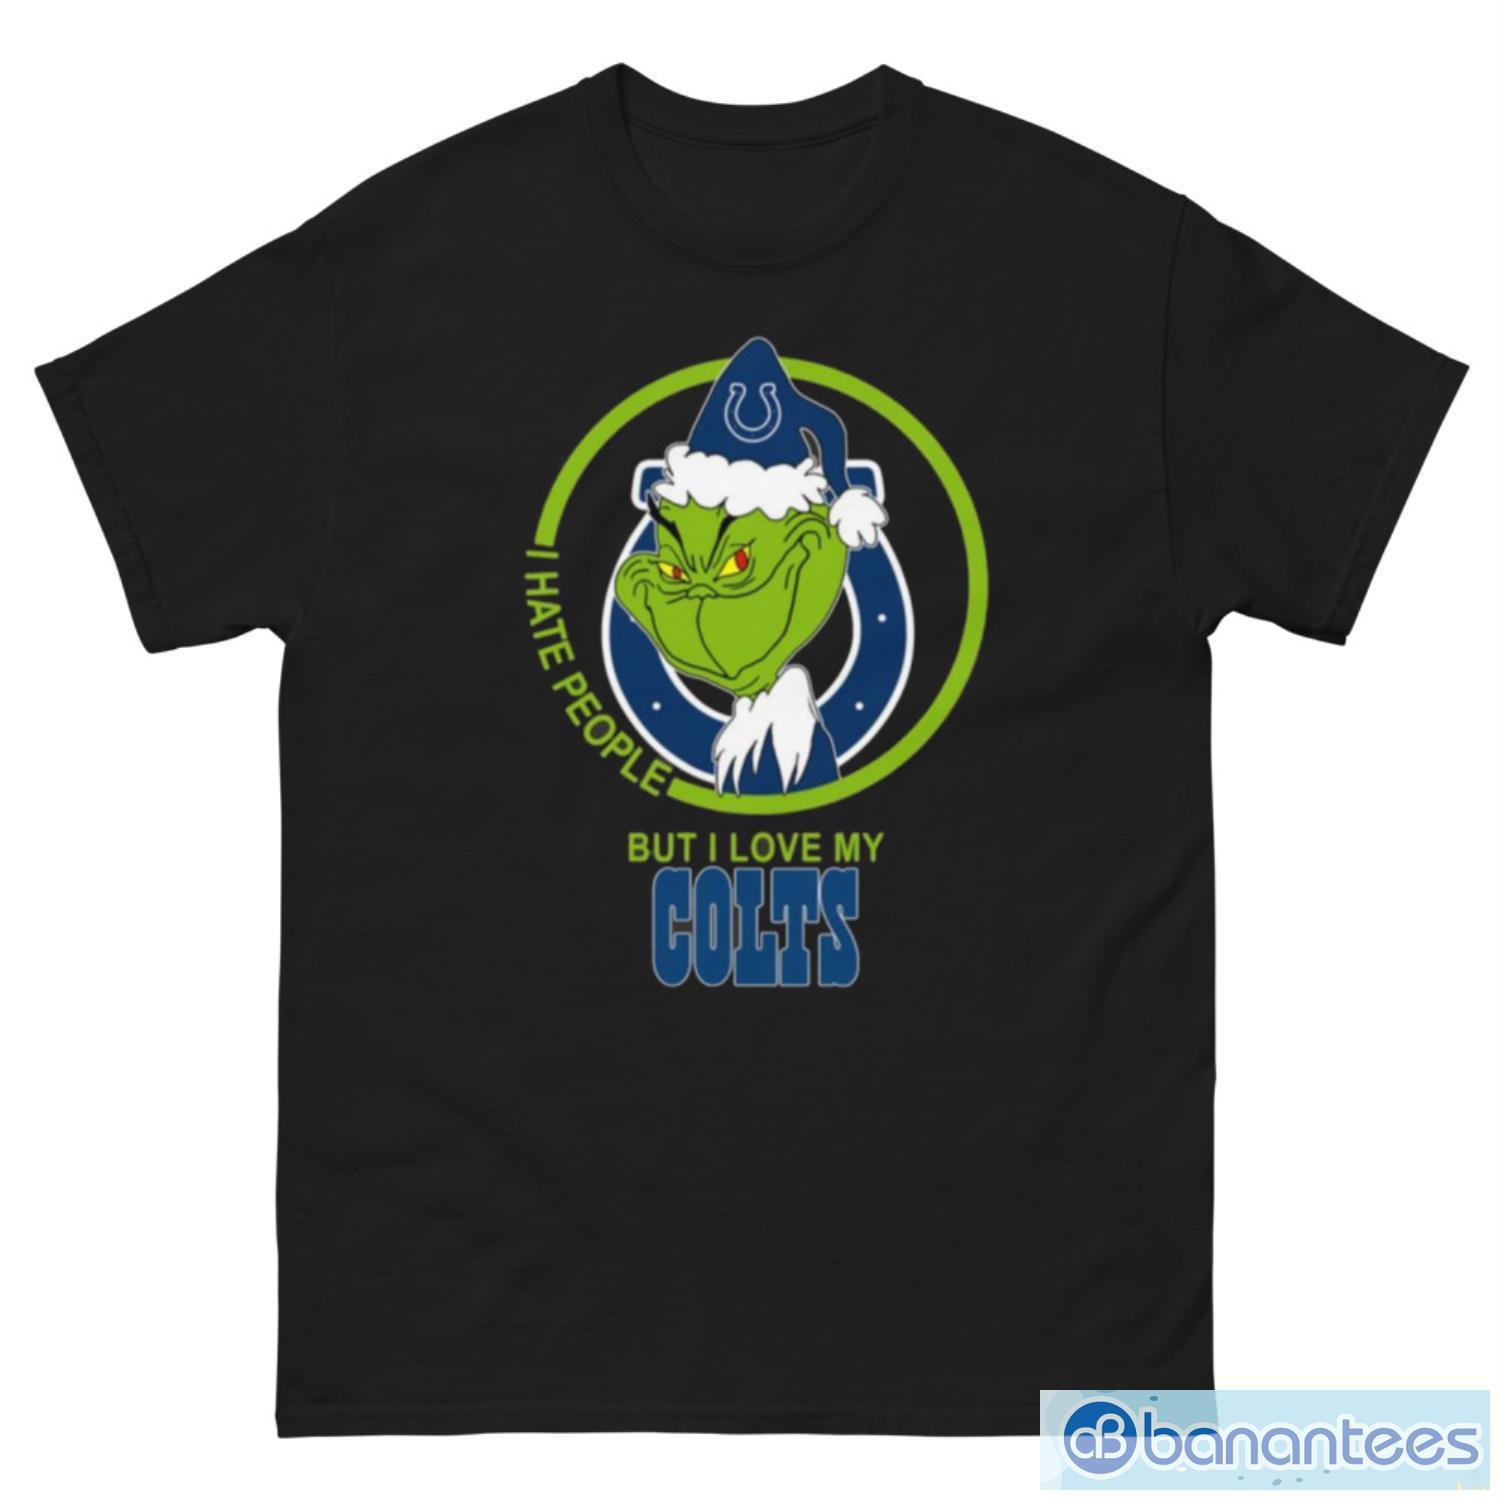 Indianapolis Colts NFL Christmas Grinch I Hate People But I Love My Favorite Football Team T Shirt - G500 Men’s Classic Tee